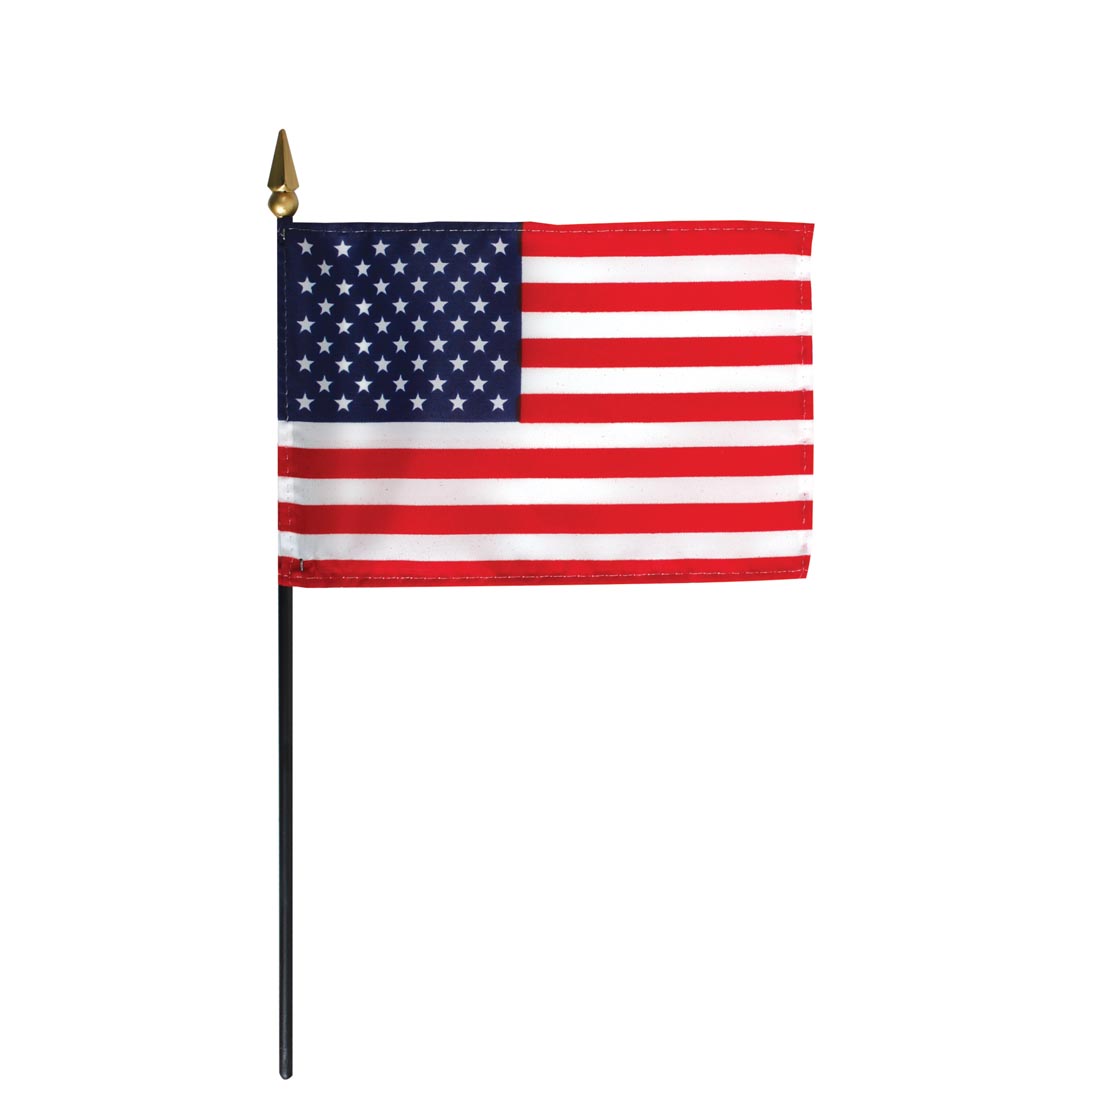 United States of America Flag on a black staff with gold spearhead